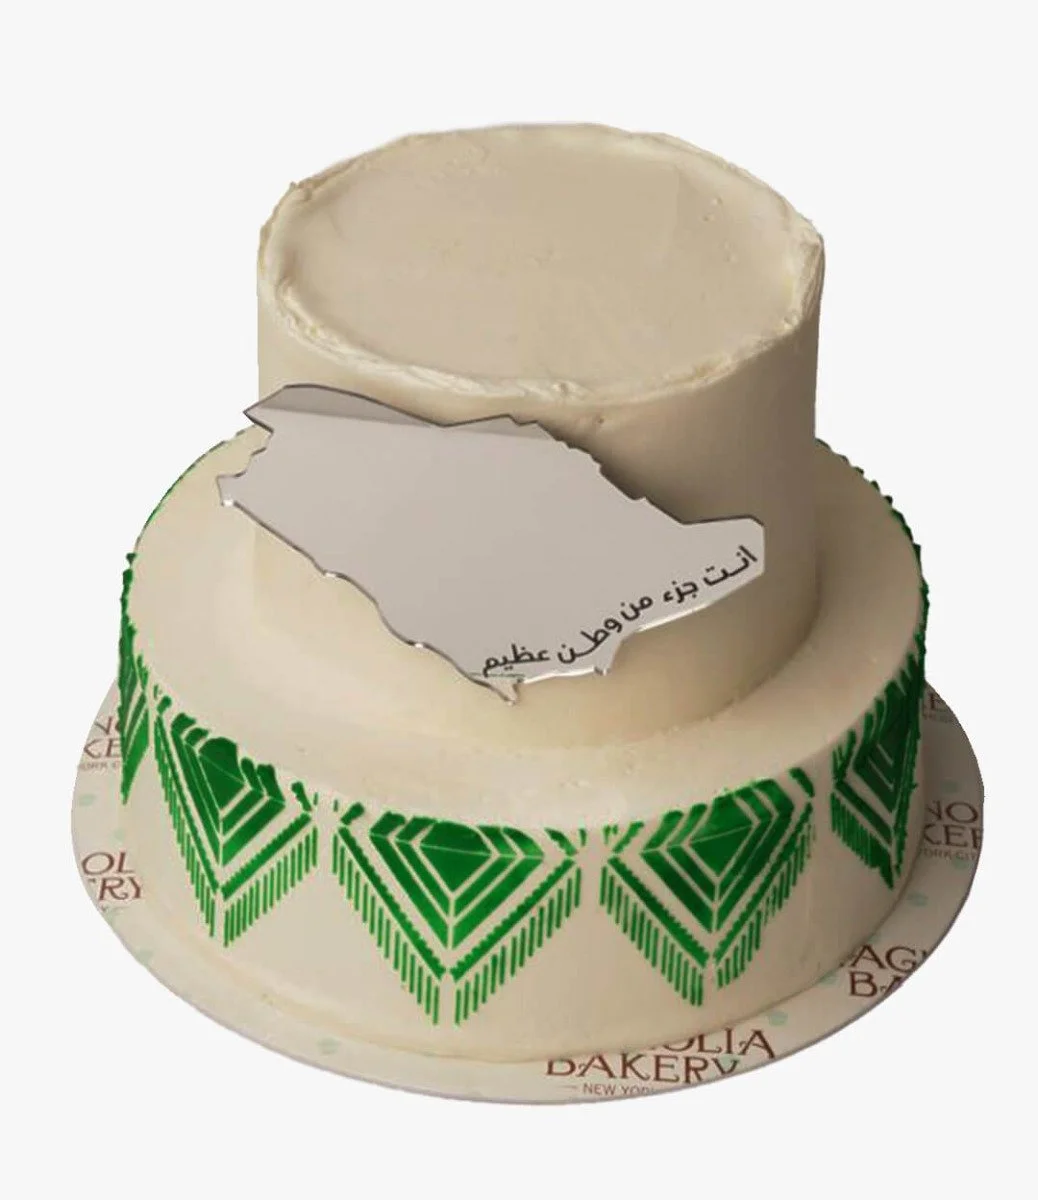 National Day Cake 2 Layers by Magnolia Bakery